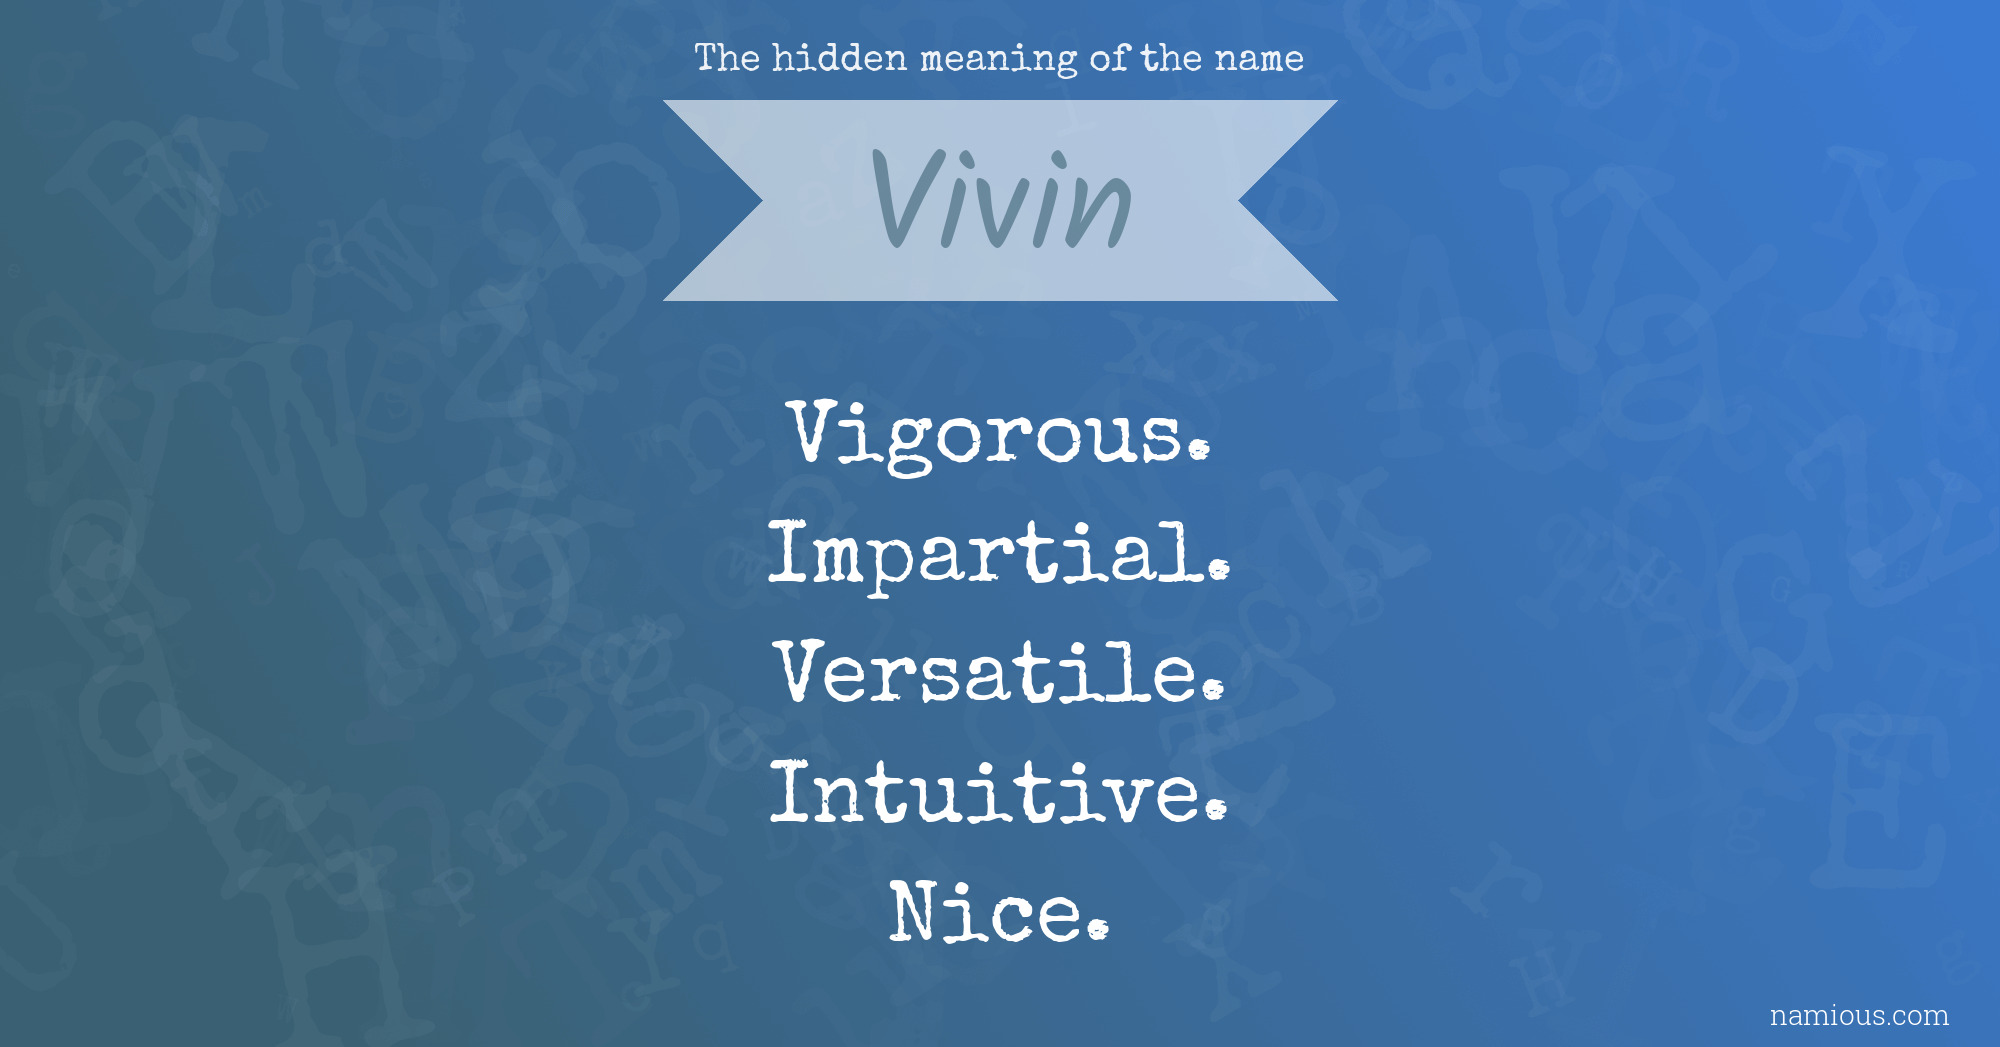 The hidden meaning of the name Vivin